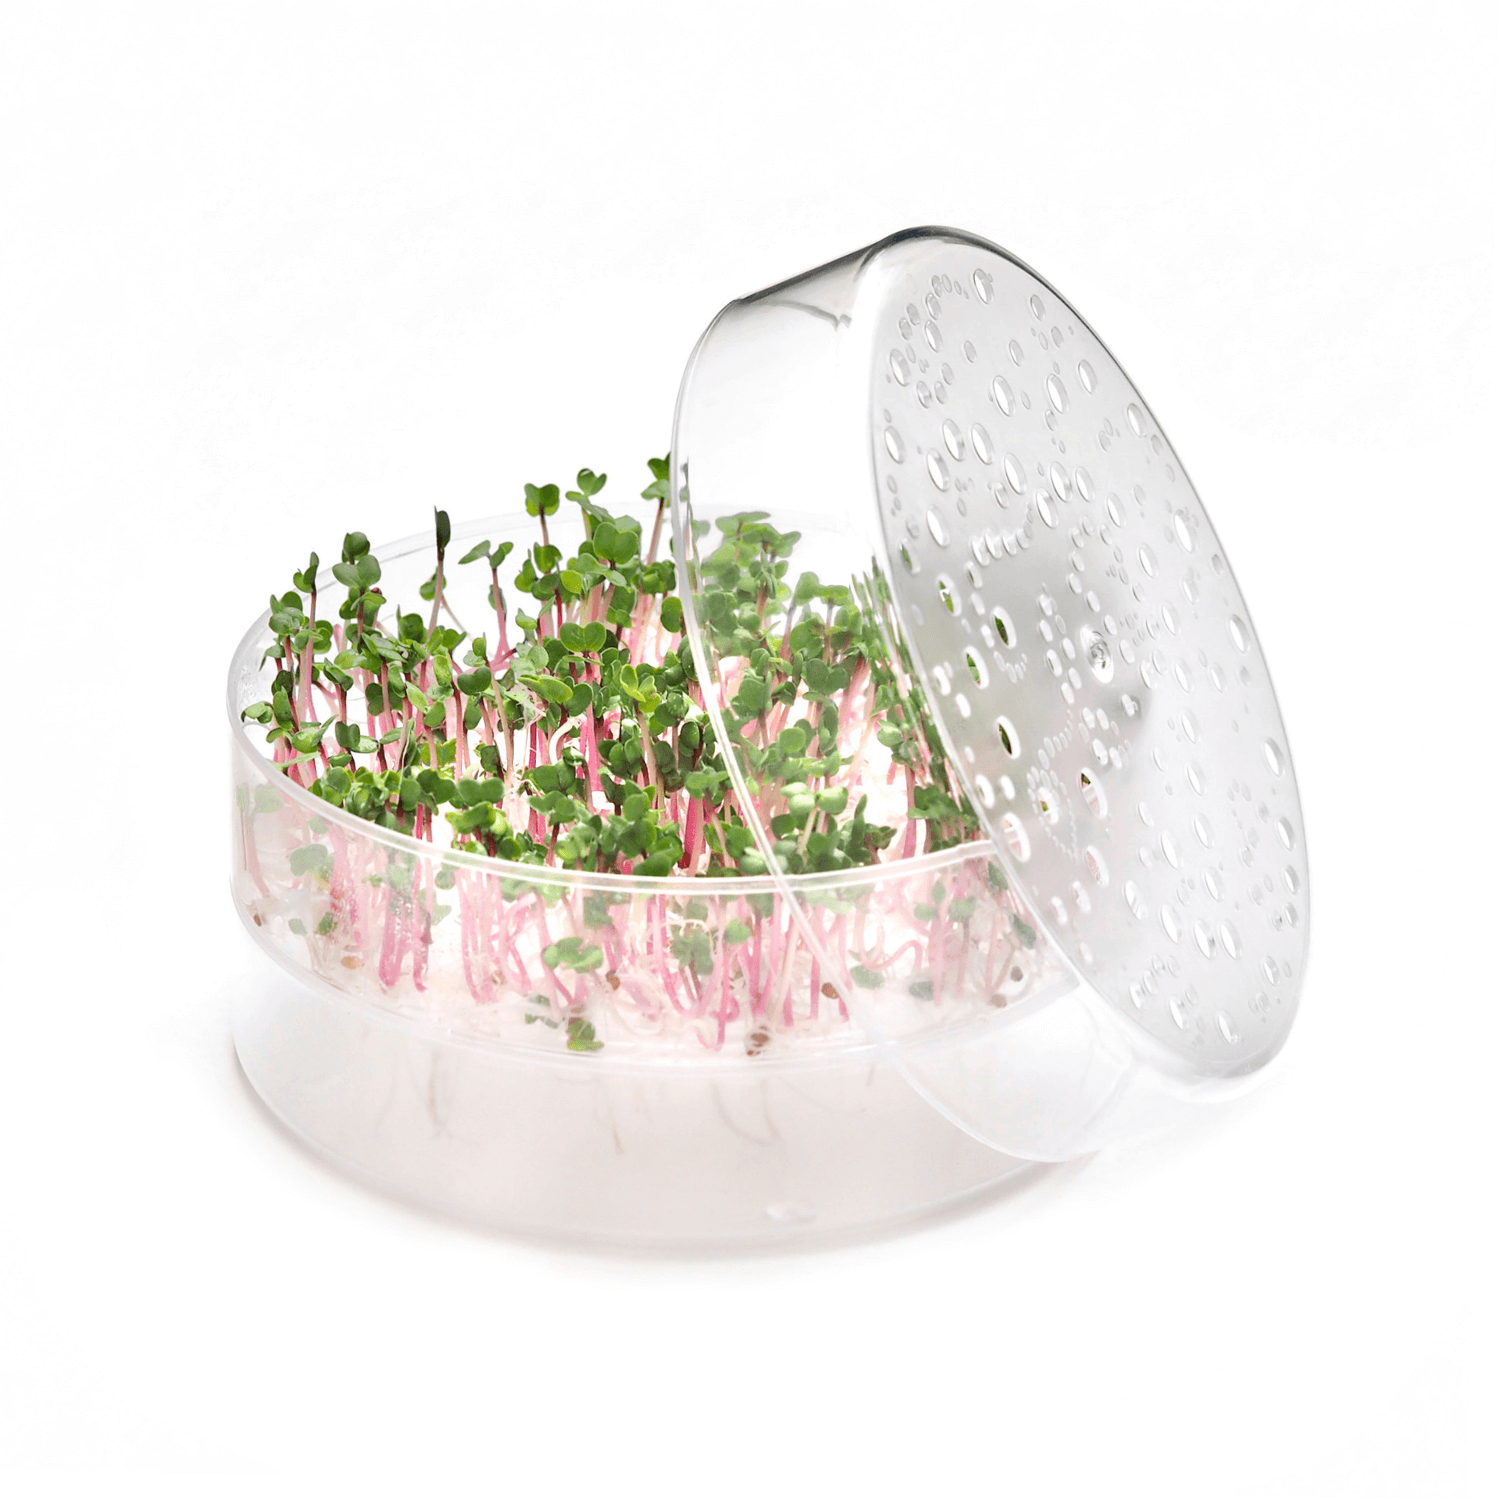 Microgreen tray SproutPearl by FRESH SPROUTS